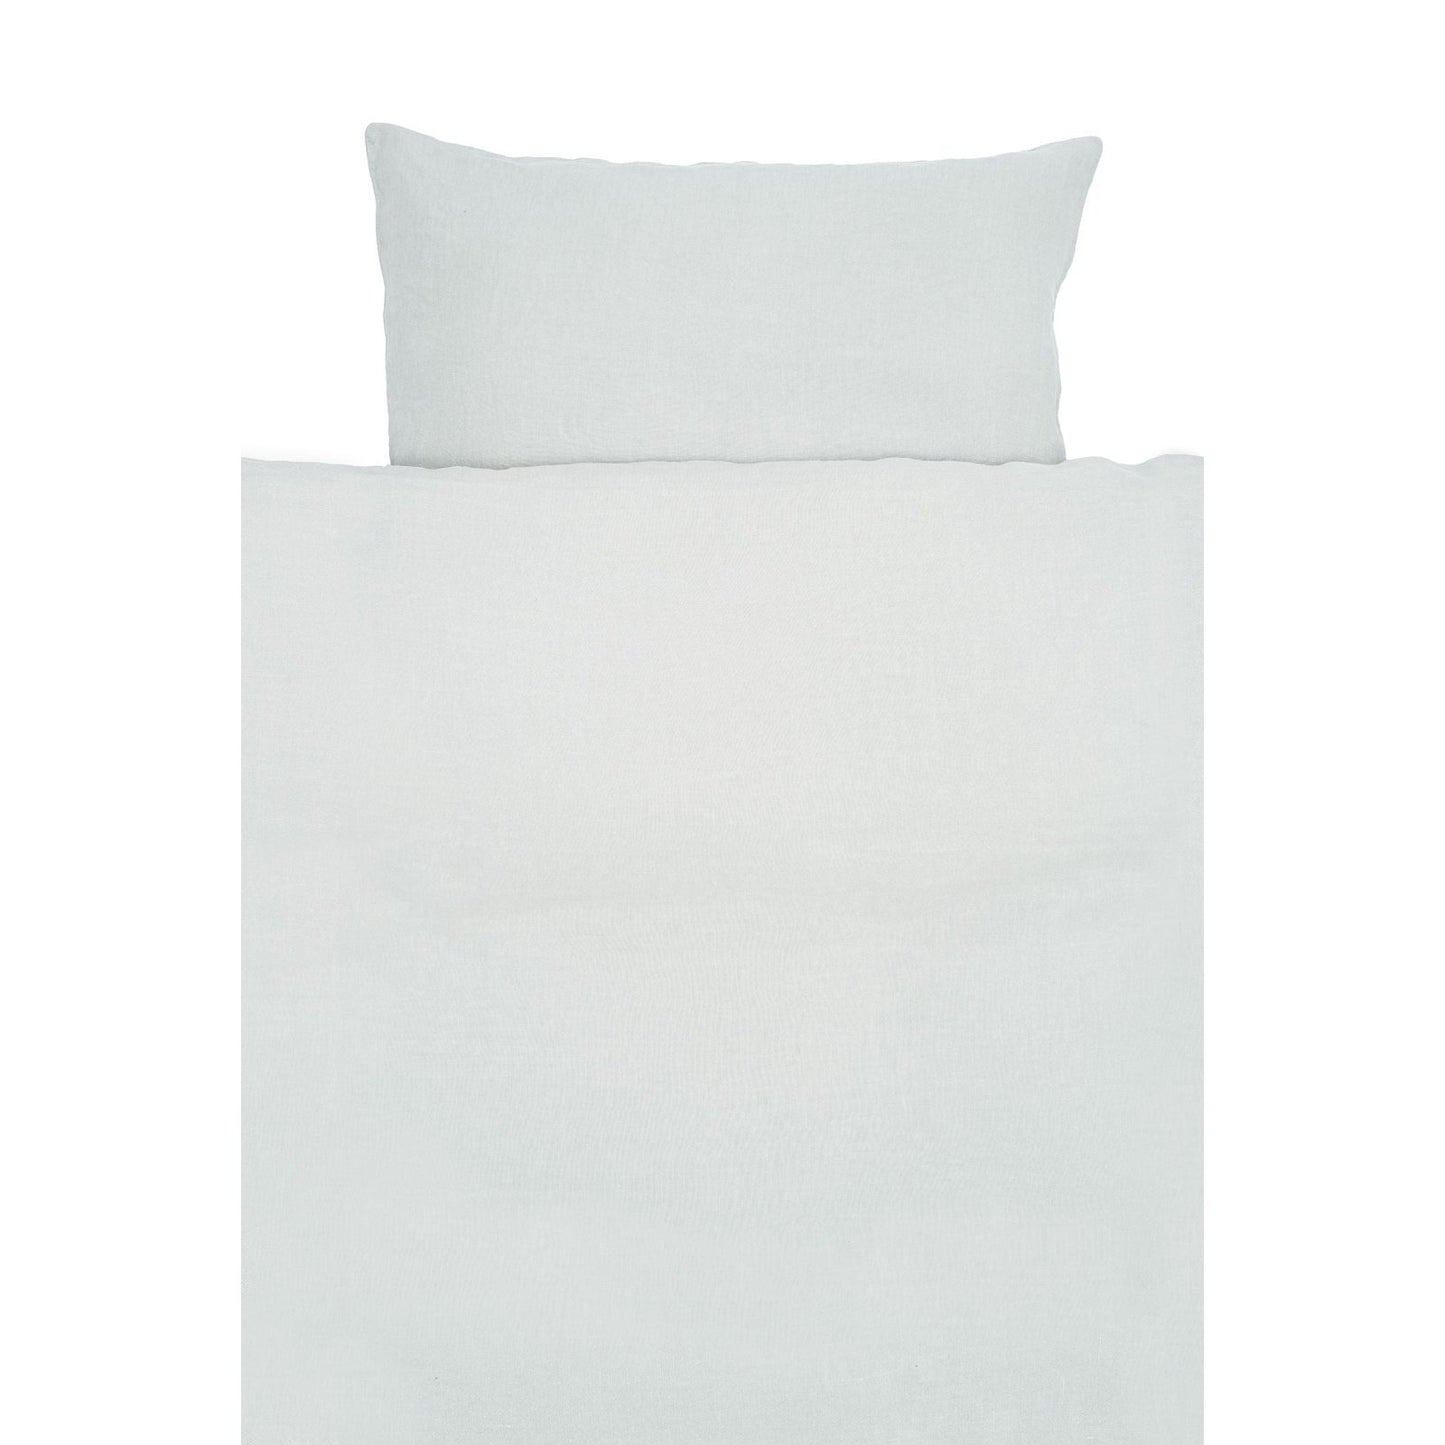 Mira bedlinens are the purest moments of luxury. These 100% washed linen duvet covers will guarantee you the perfect night’s sleep. Linen bedcovers are great to regulate heat and cold, are breathable and have anti-allergenic properties.  The Mira bedlinens are easy to care for, free of shrinkage and iron free. The closure of the duvets is finished with a hidden seam with mother of pearl buttons.